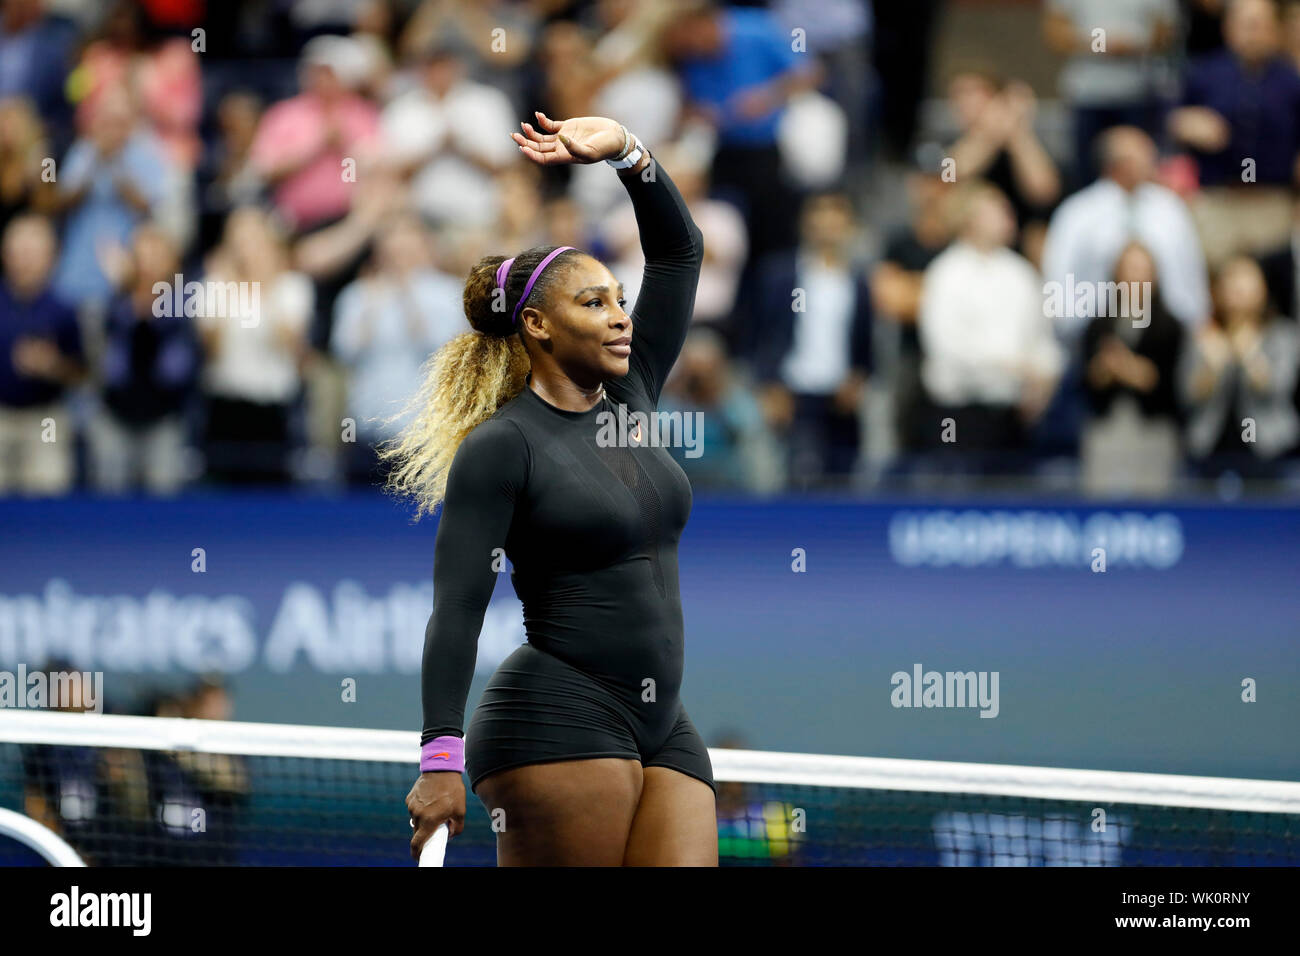 New York, USA. 3rd Sep, 2019. Serena Williams gestures to audience after women's singles quarterfinal match between Wang Qiang of China and Serena Williams of the United States at the 2019 US Open in New York, the United States, Sept. 3, 2019. Credit: Li Muzi/Xinhua/Alamy Live News Stock Photo